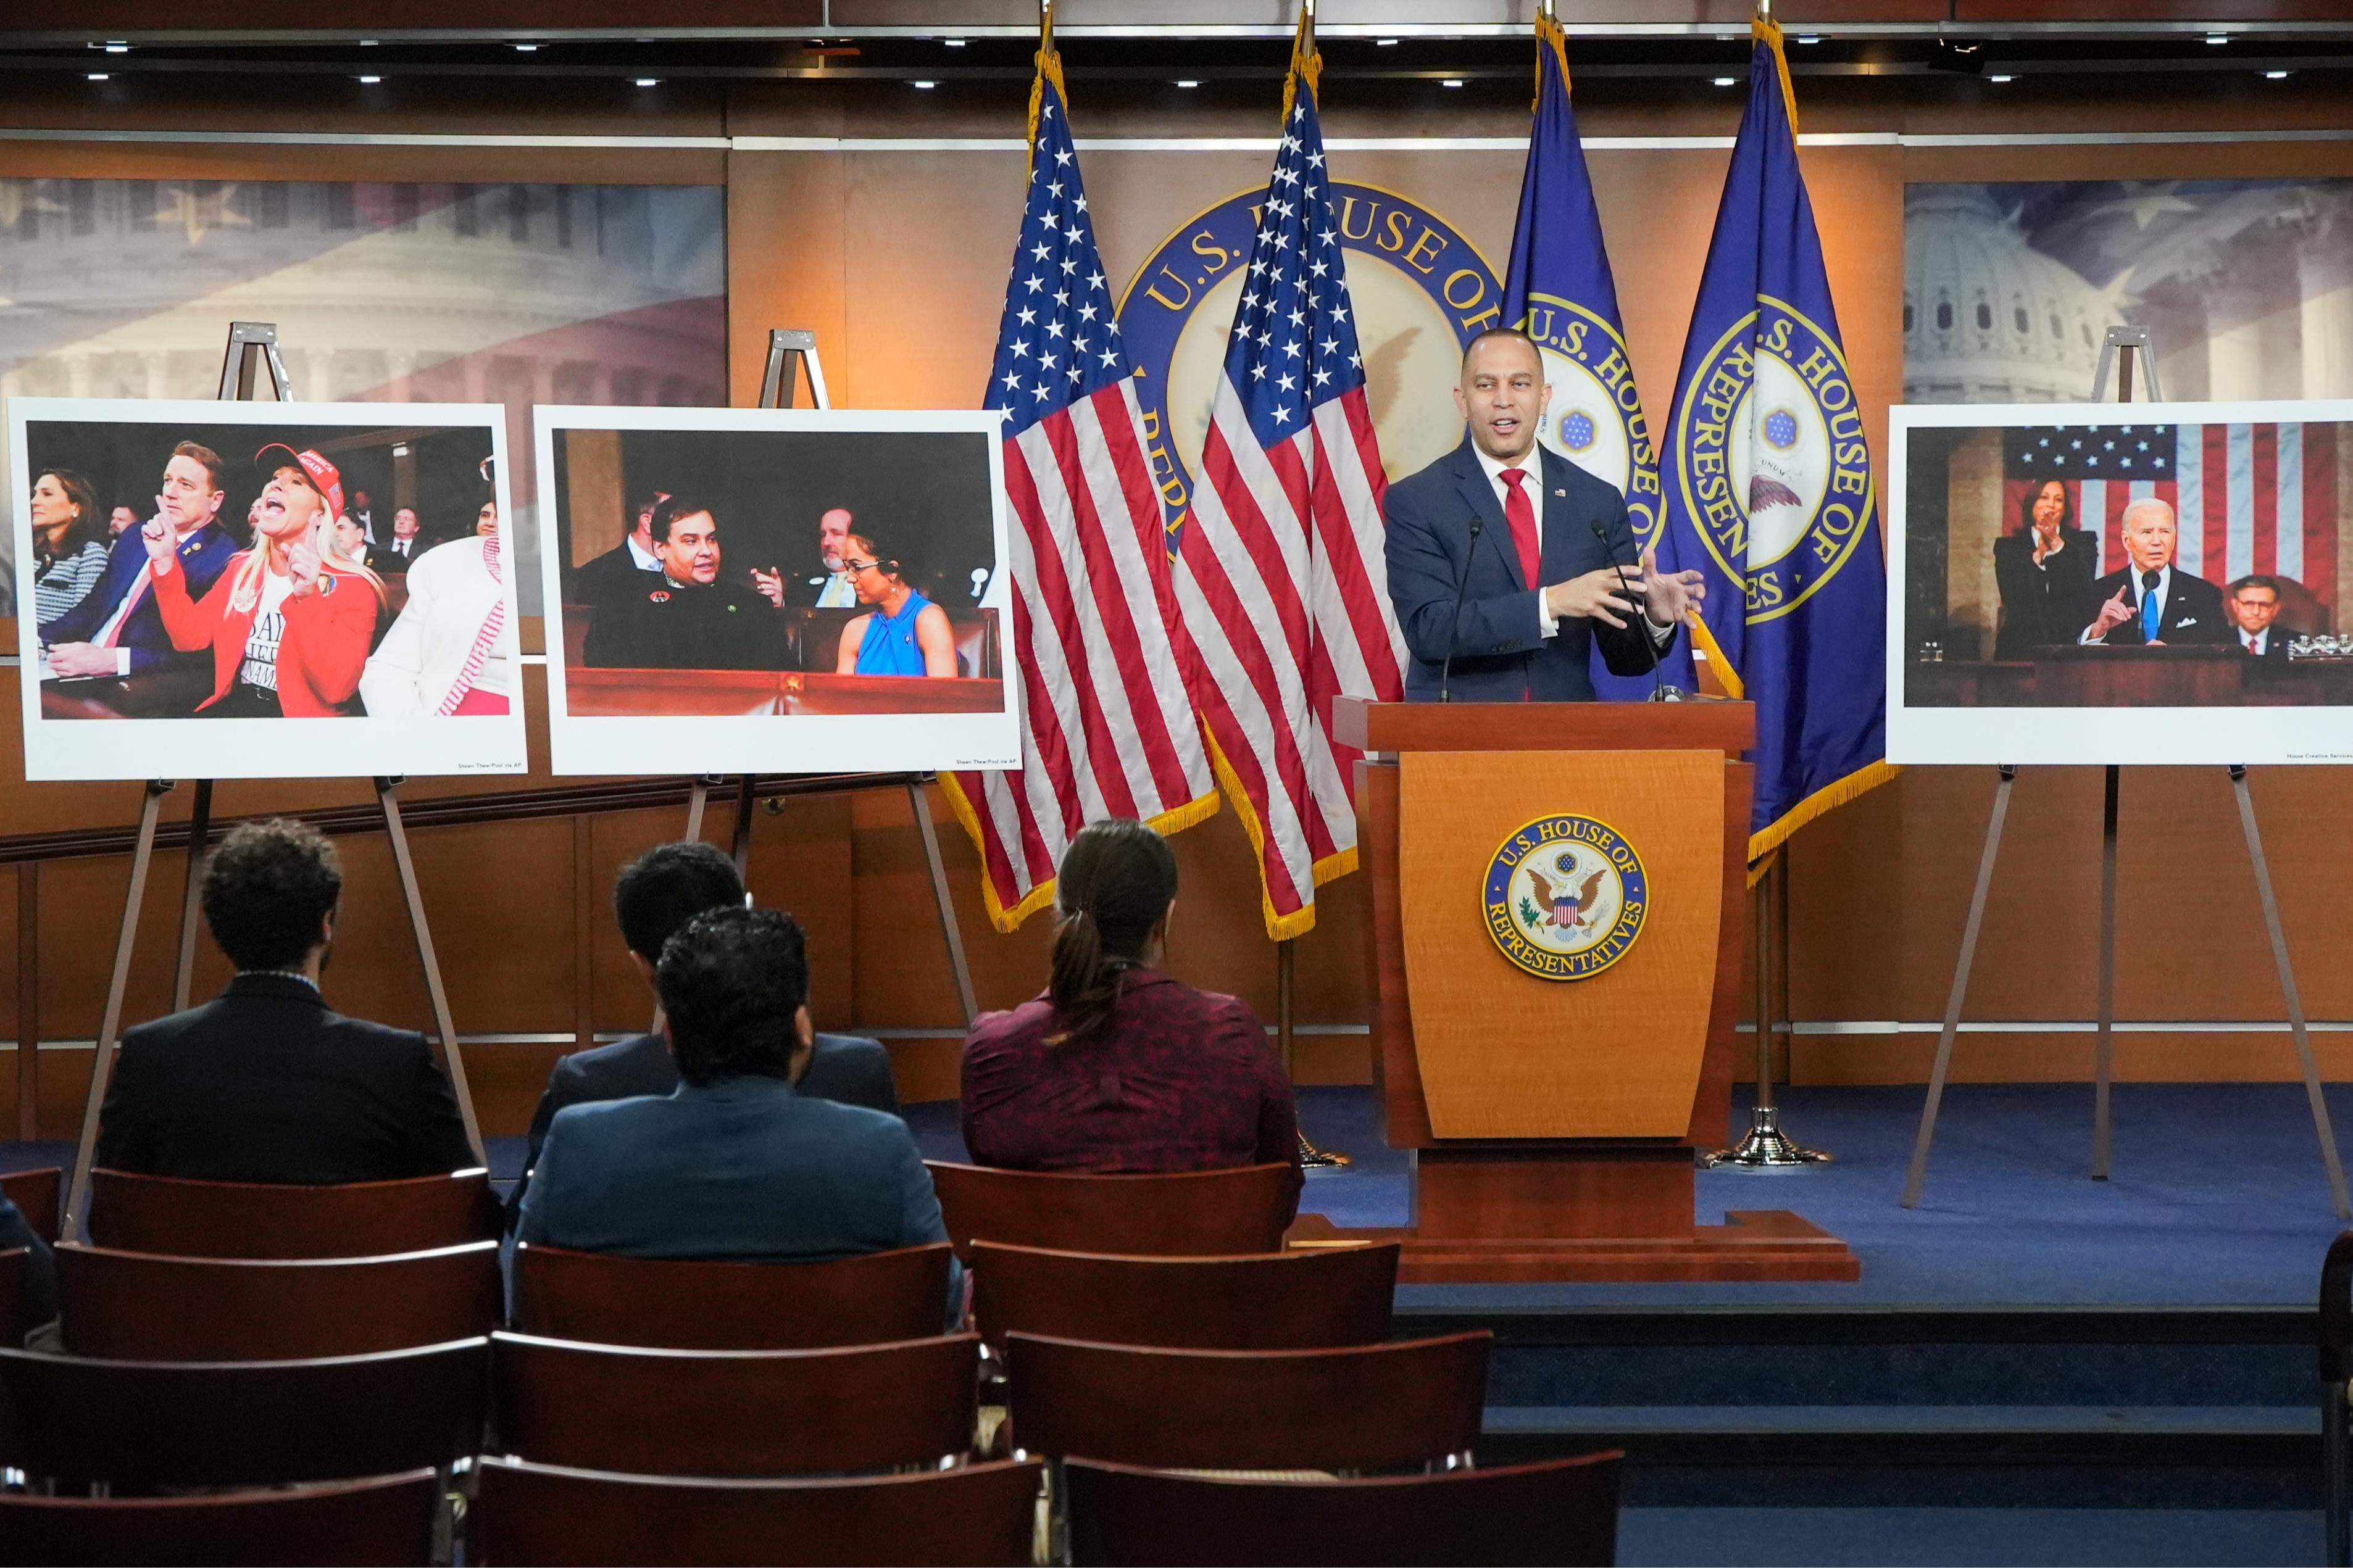 Leader Jeffries Speaks at a Press Conference with photos of the state of the union address